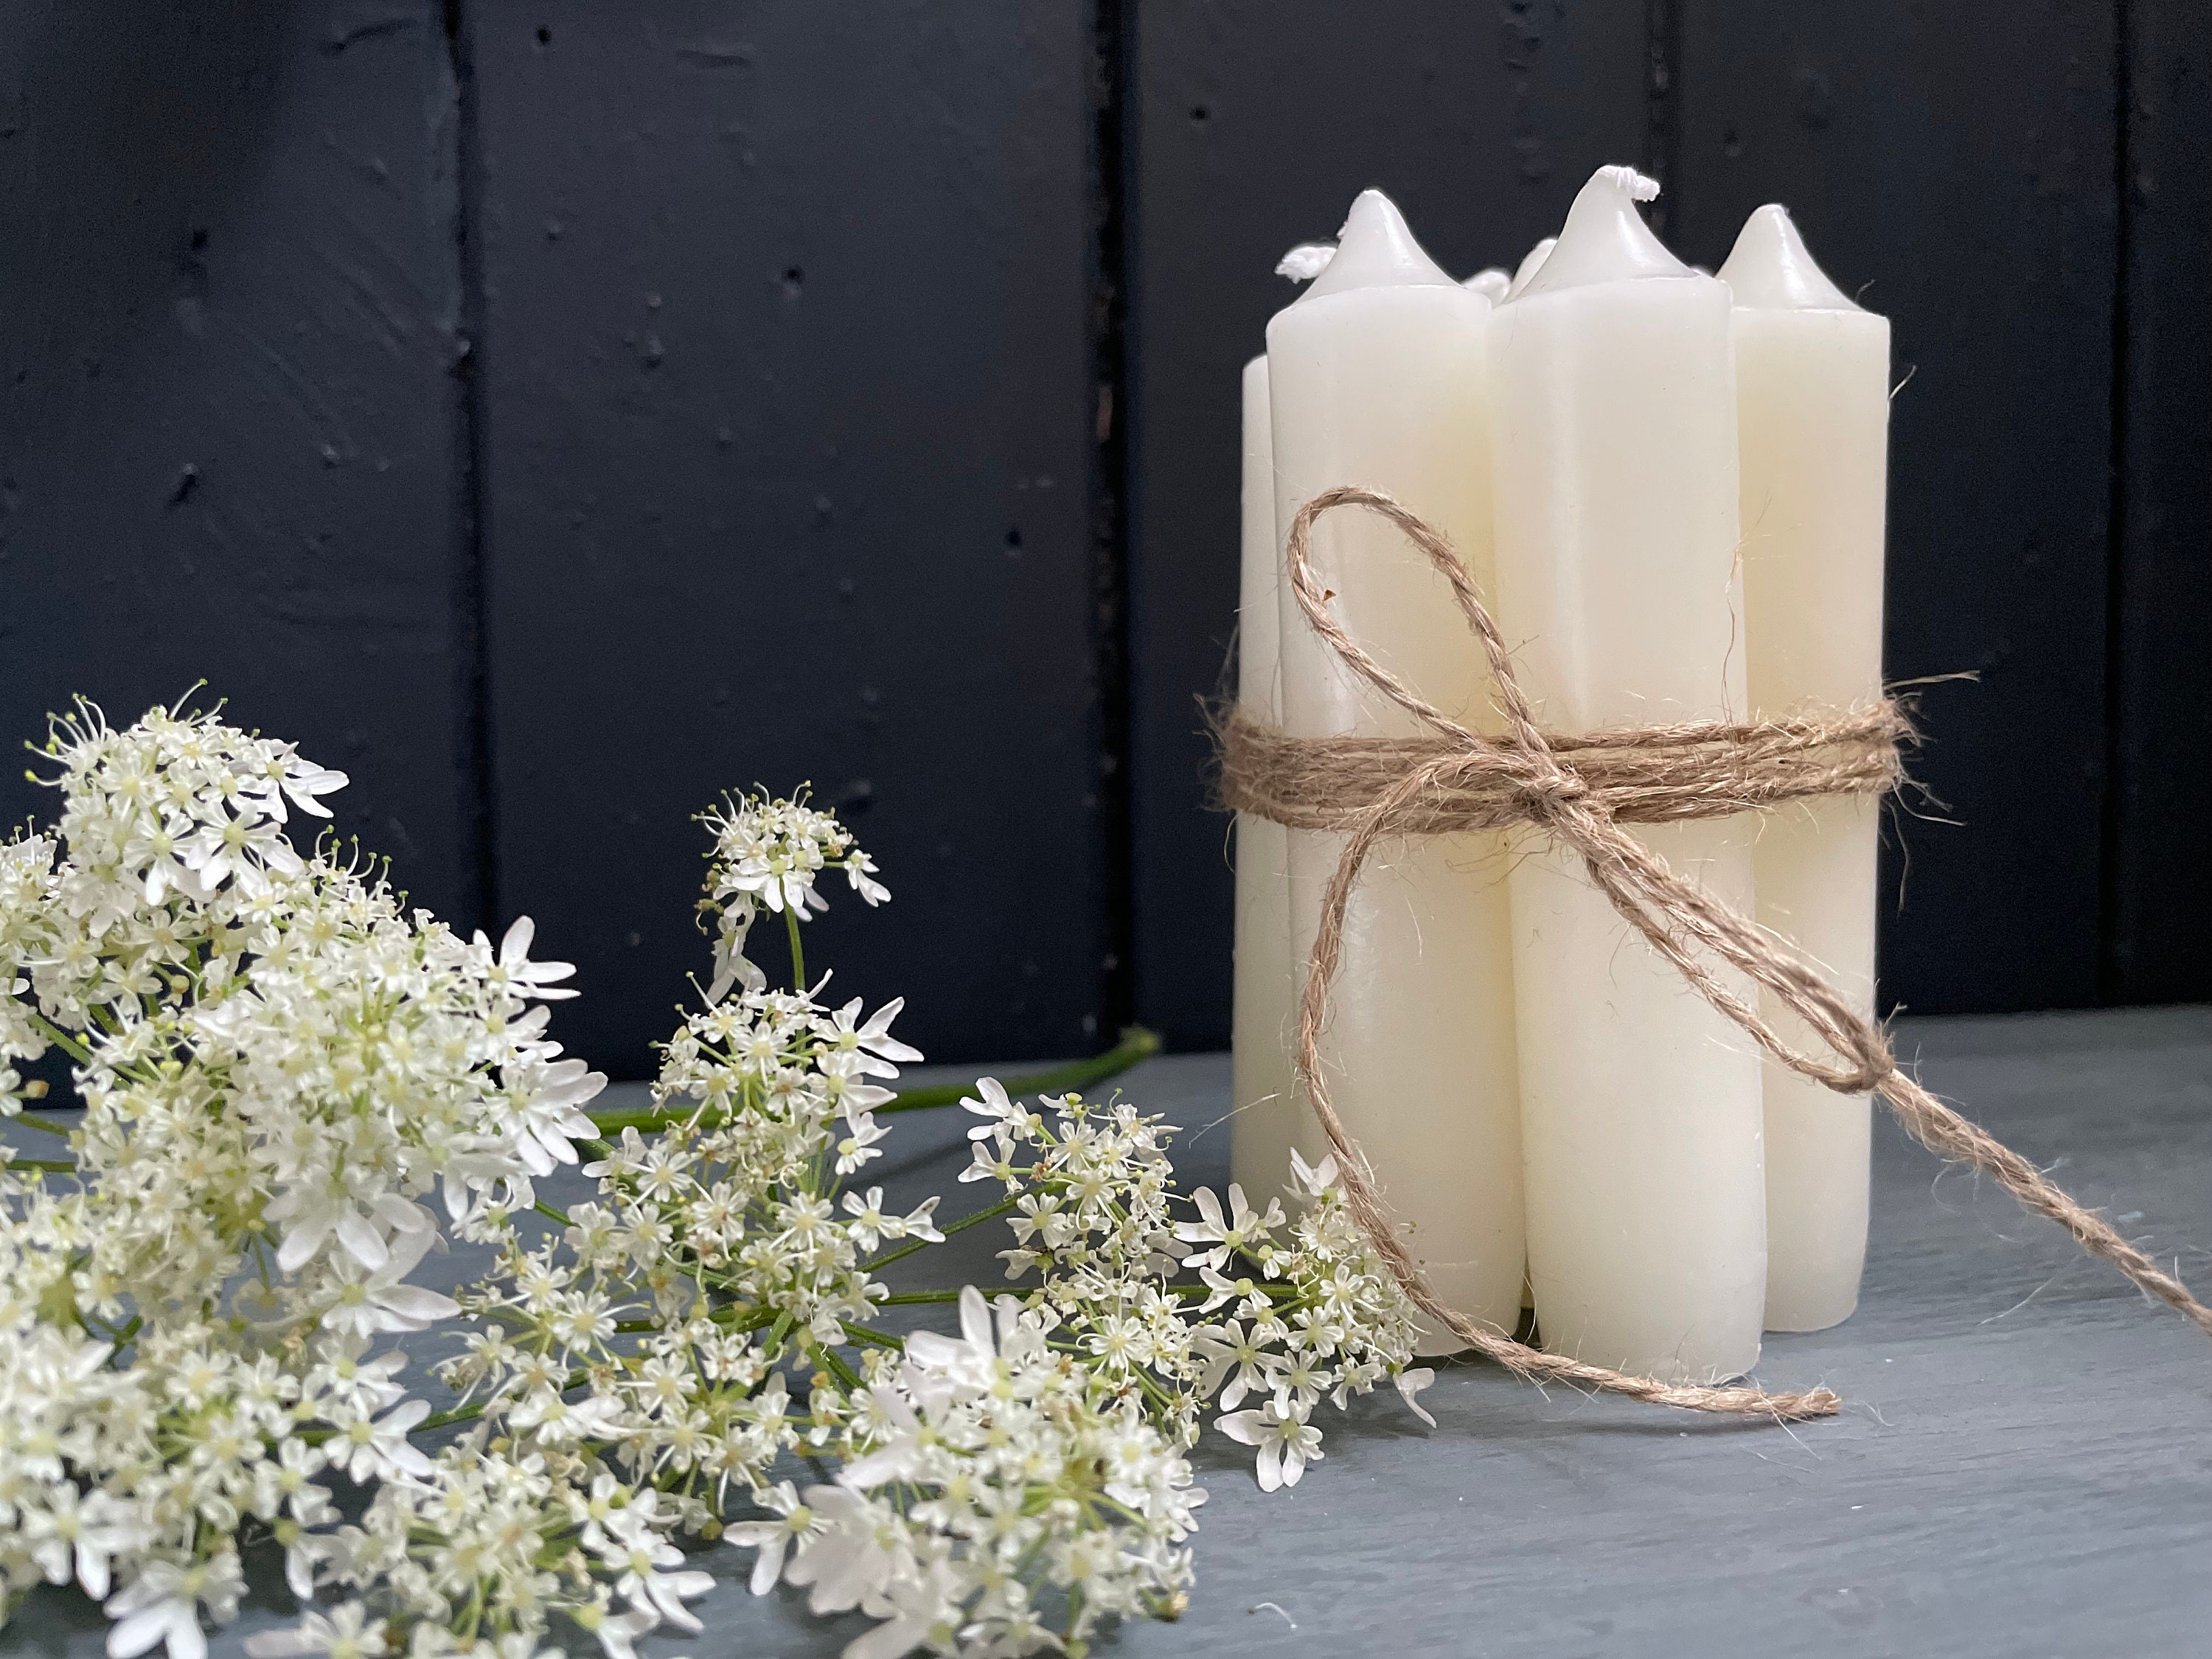 DIY Butter Candle Bundle Kit, Create Fun and Delicious Artisanal